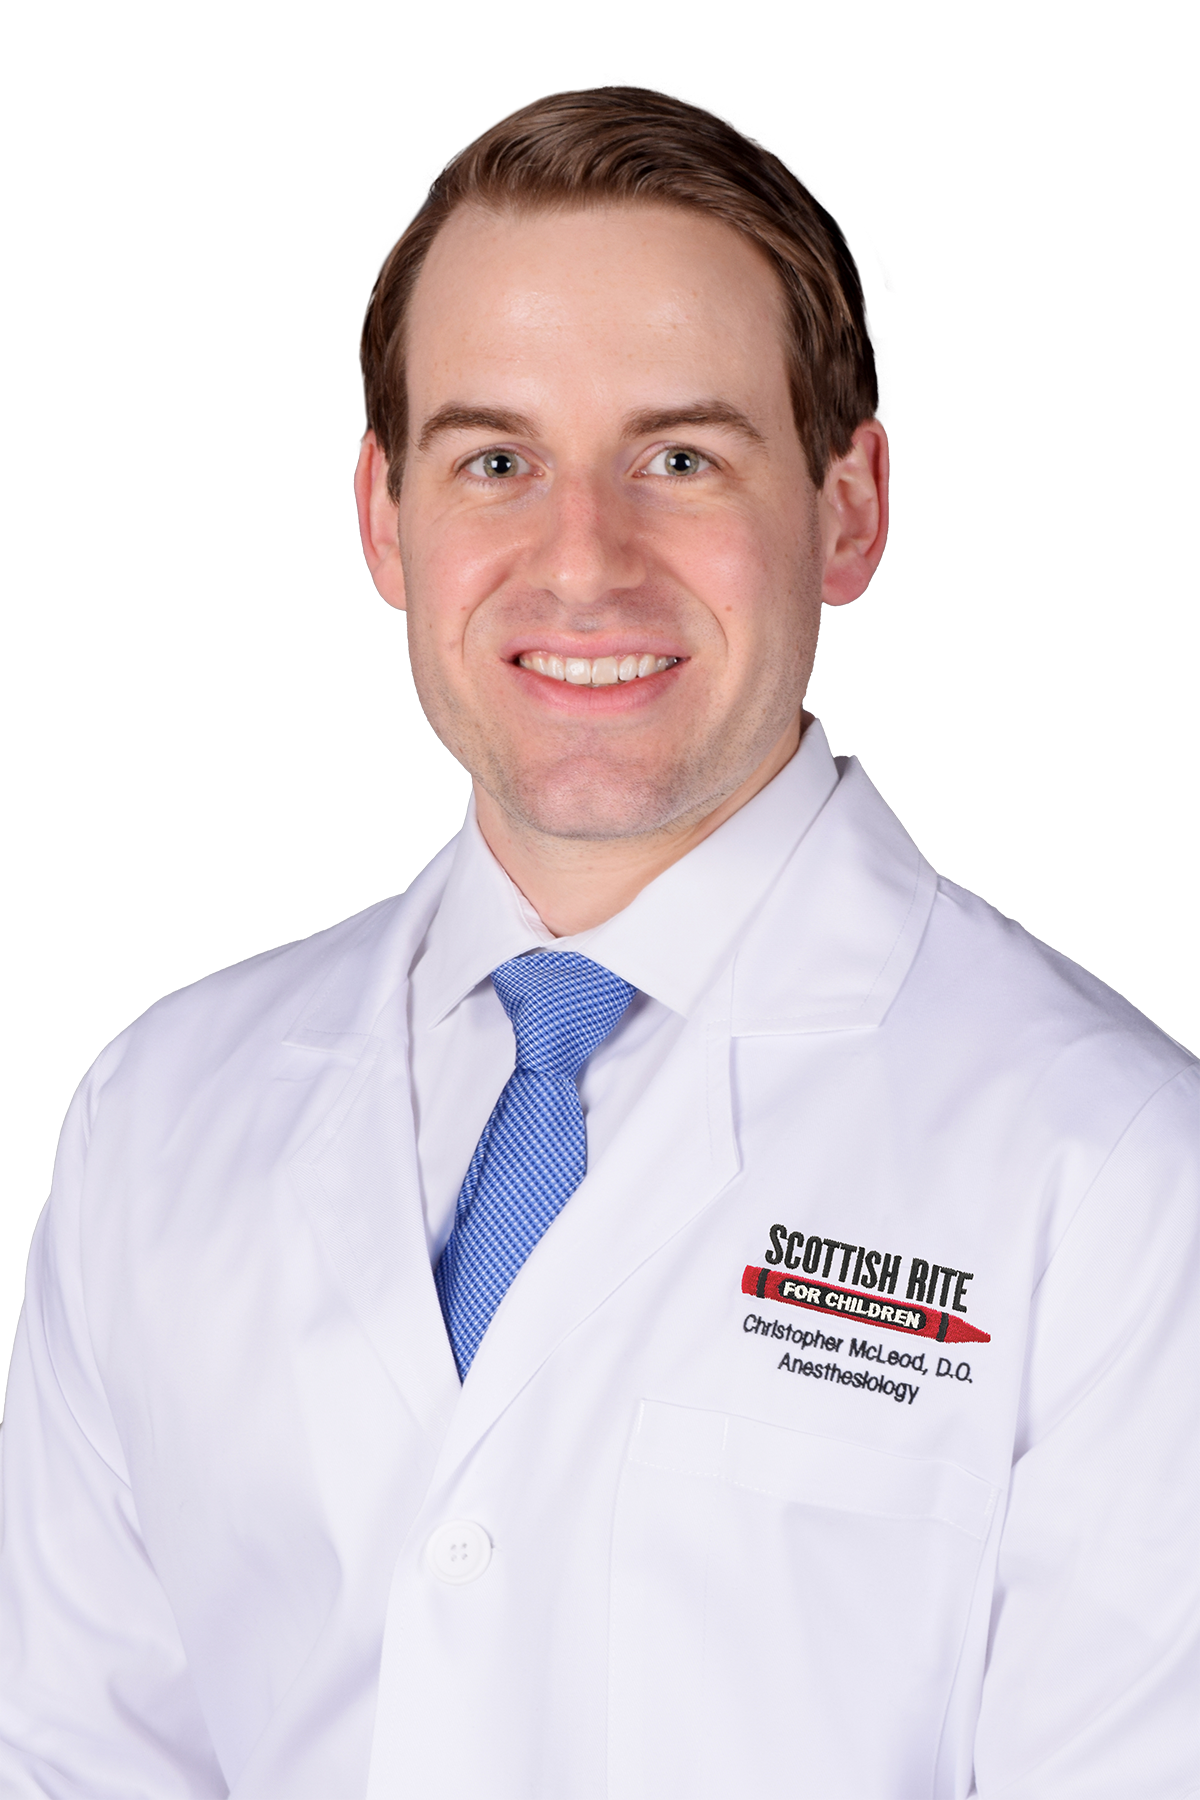 Christopher McLeod, D.O., is a staff anesthesiologist at Scottish Rite for Children.